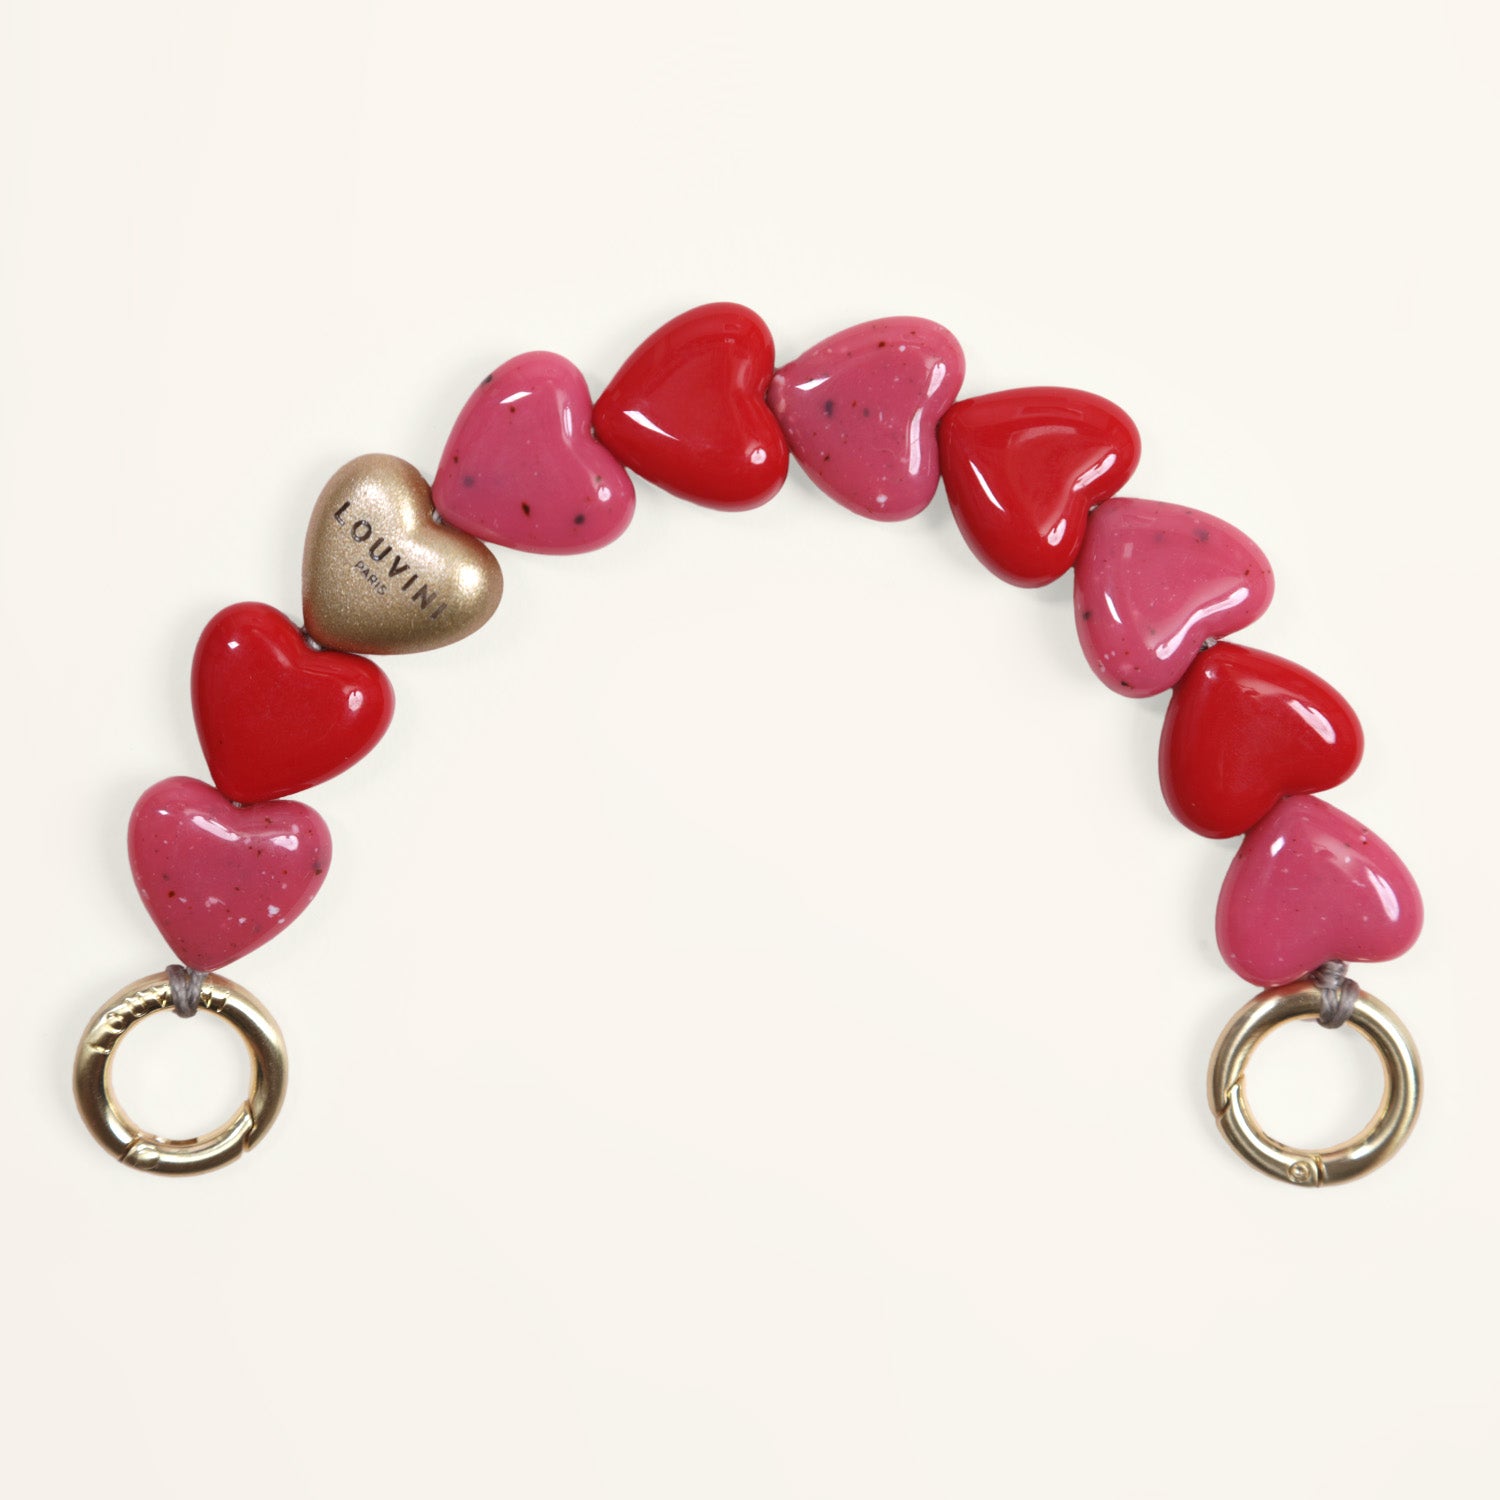 LOU GOLD-SILVER METALLIC CASE & PETIT CUORE PINK-RED CHAIN